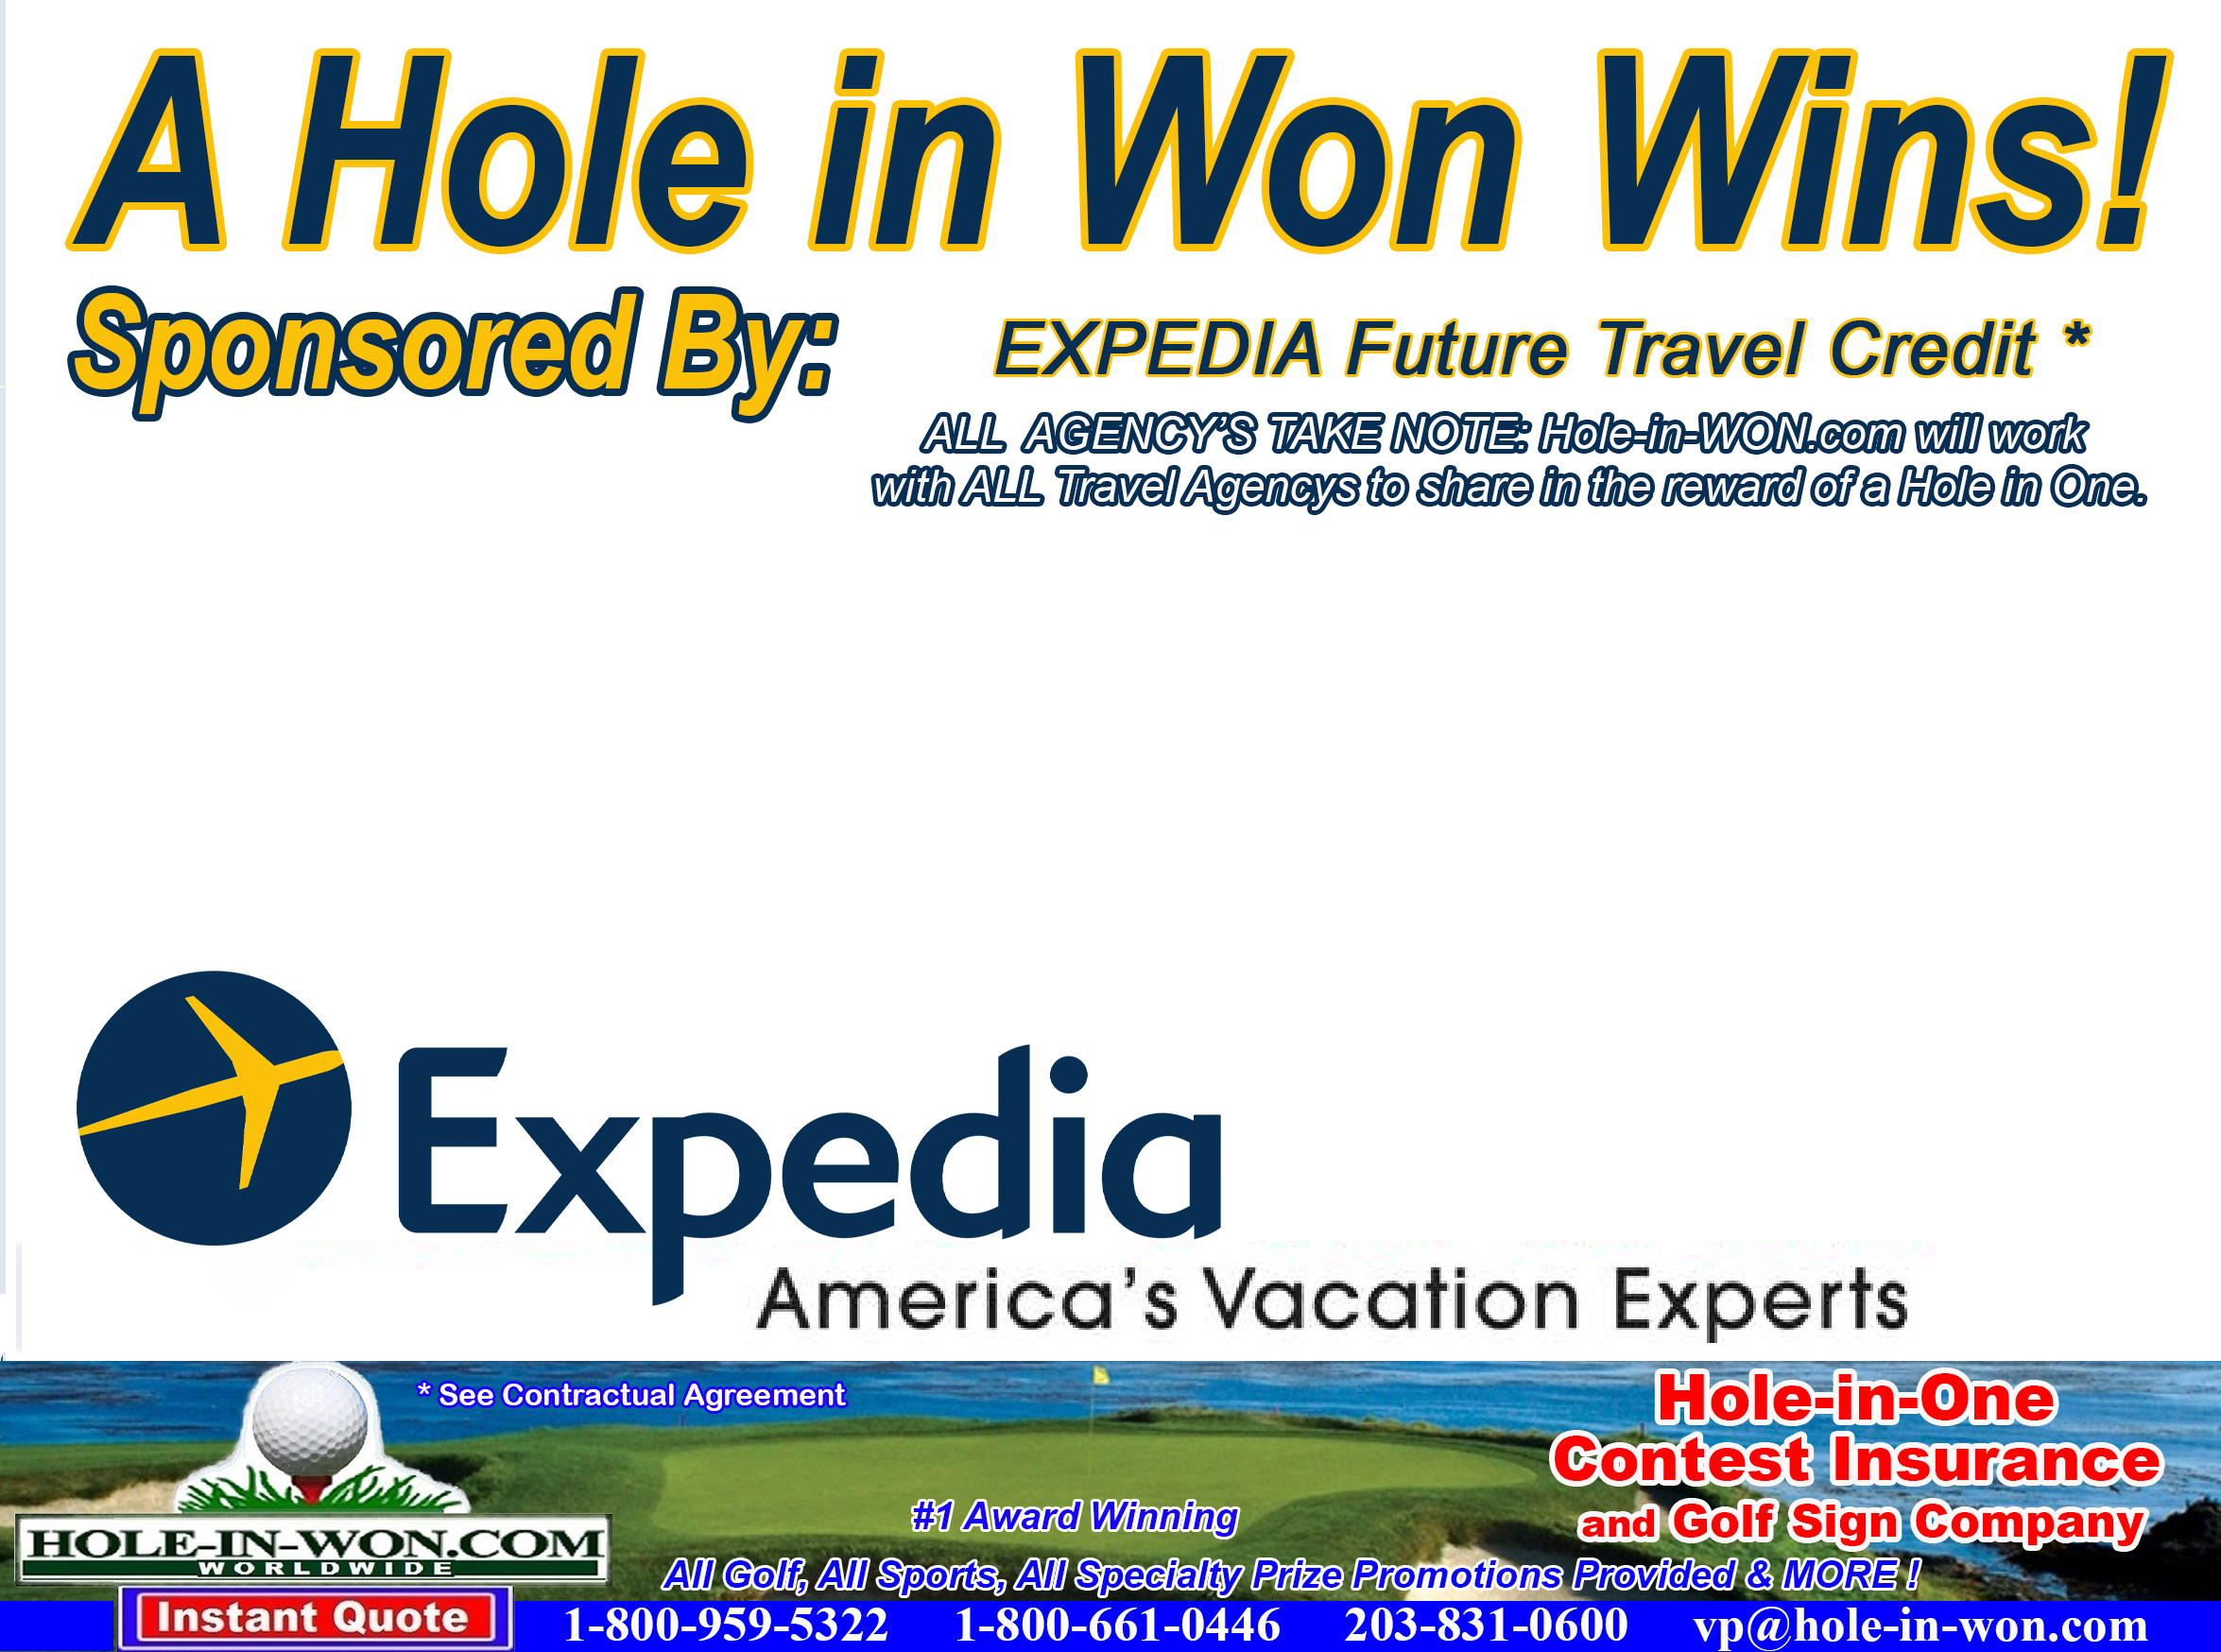 Expedia Hole in One Golf Hole Sign